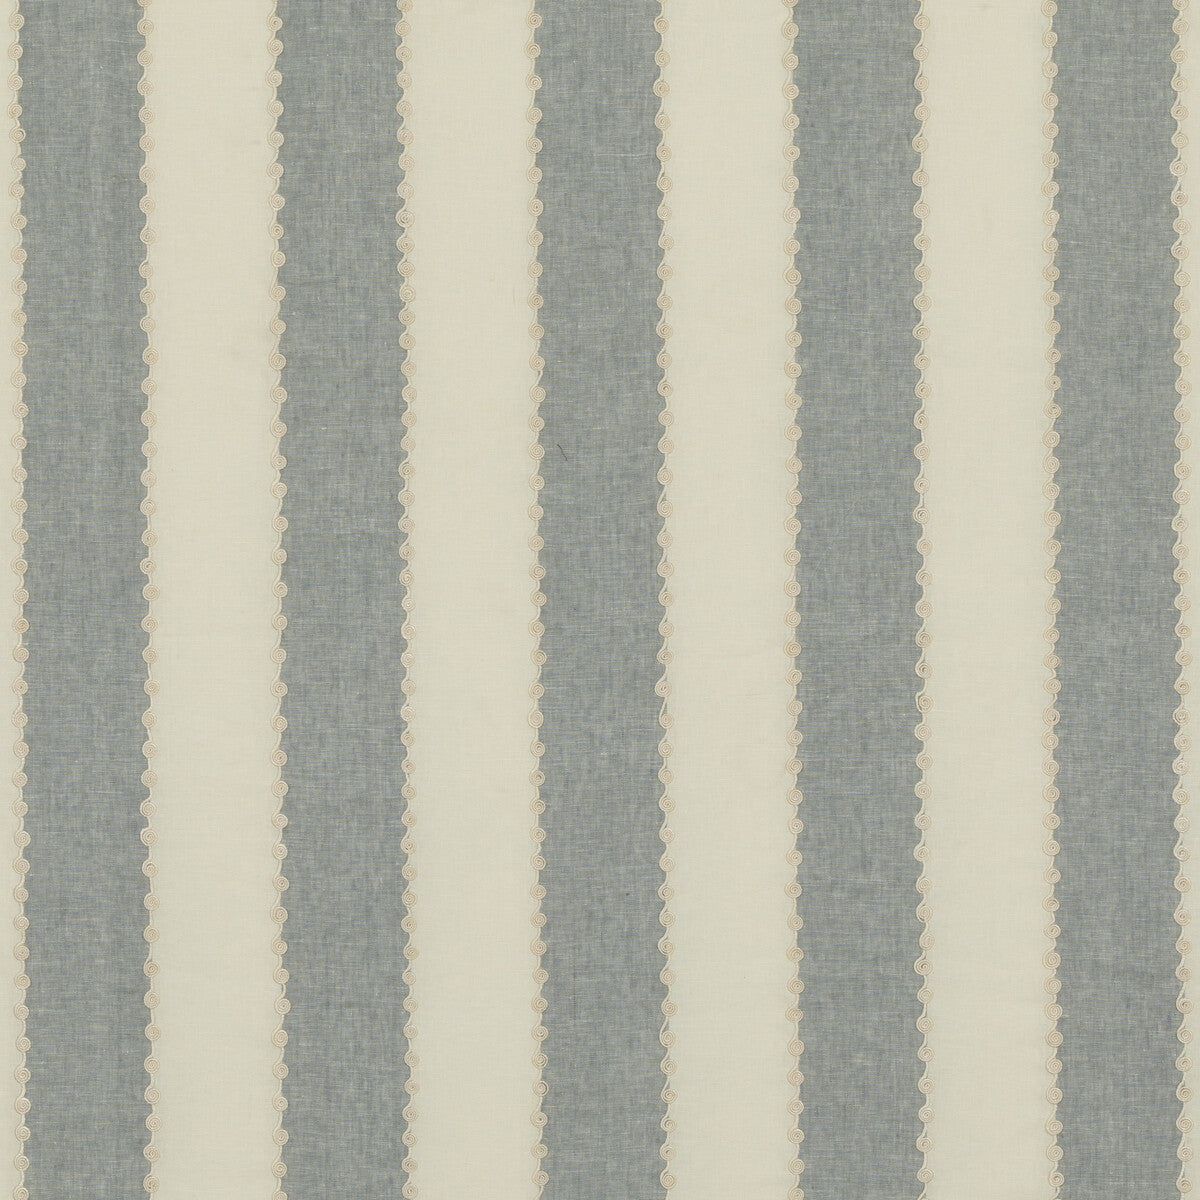 Ashmore Stripe fabric in blue color - pattern BF10944.660.0 - by G P &amp; J Baker in the Ashmore collection